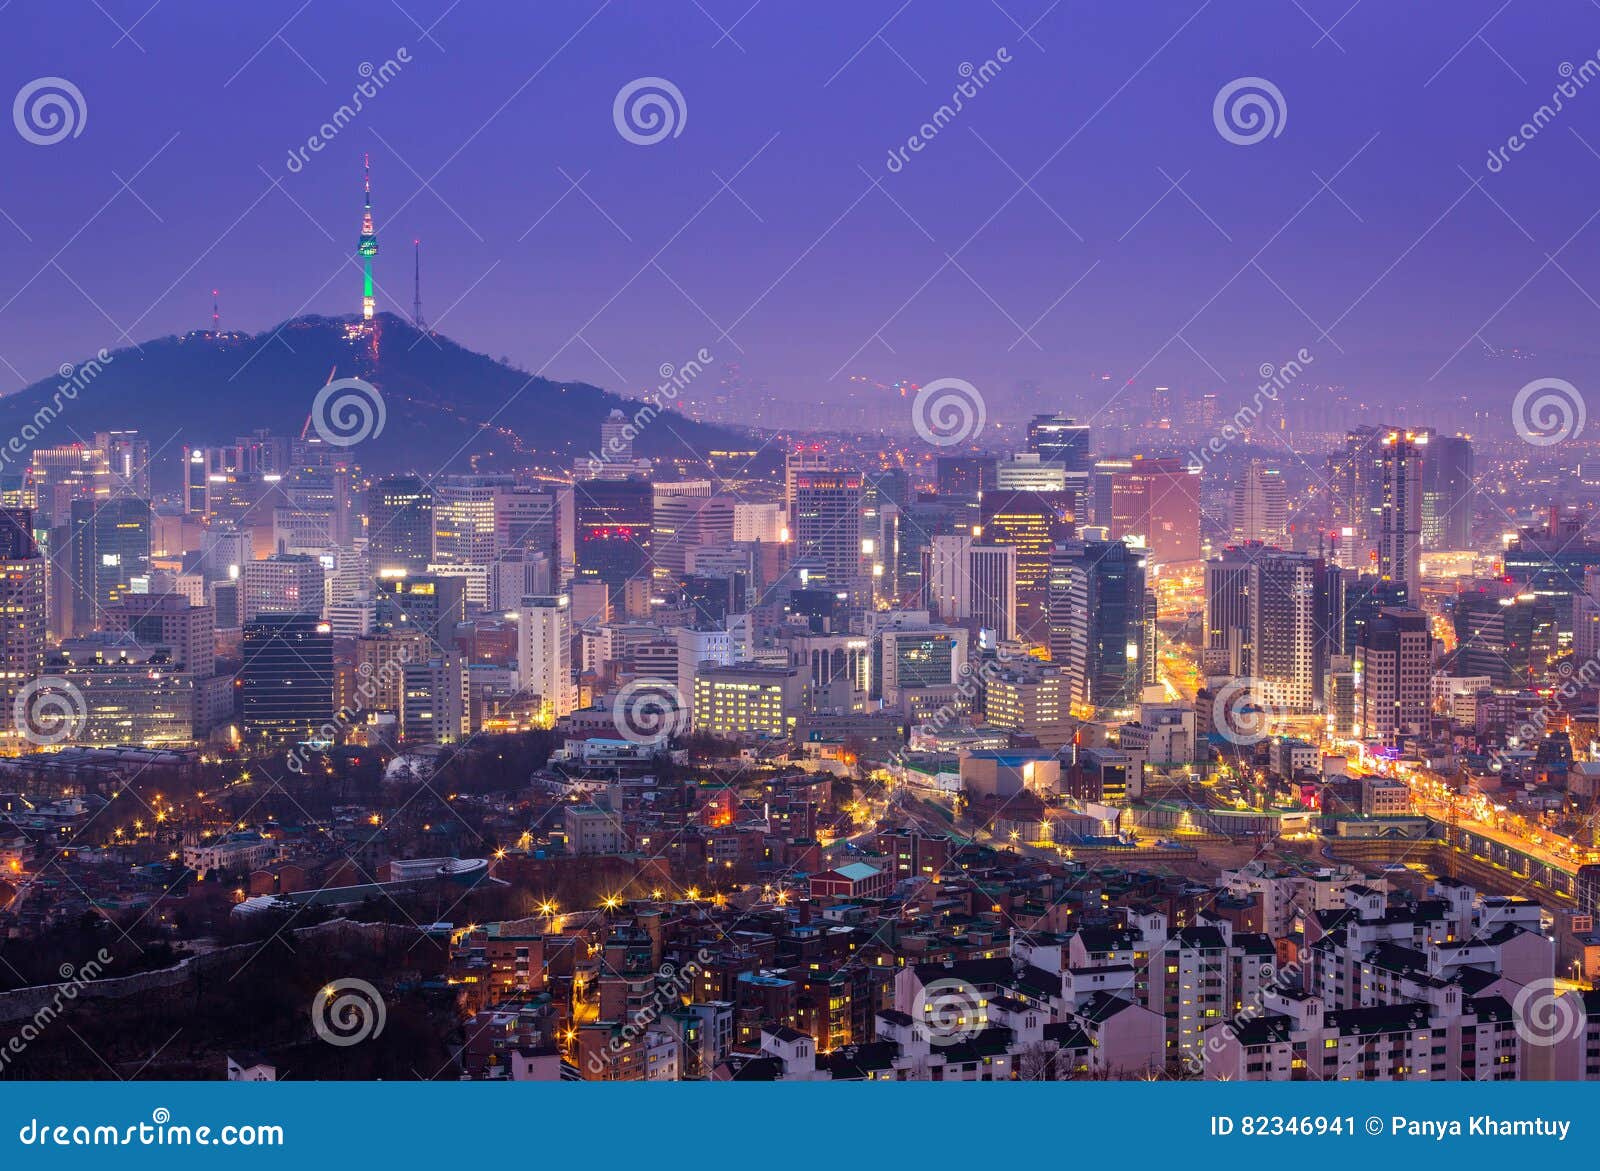 Seoul City Skyline and N Seoul Tower Editorial Photo - Image of culture ...